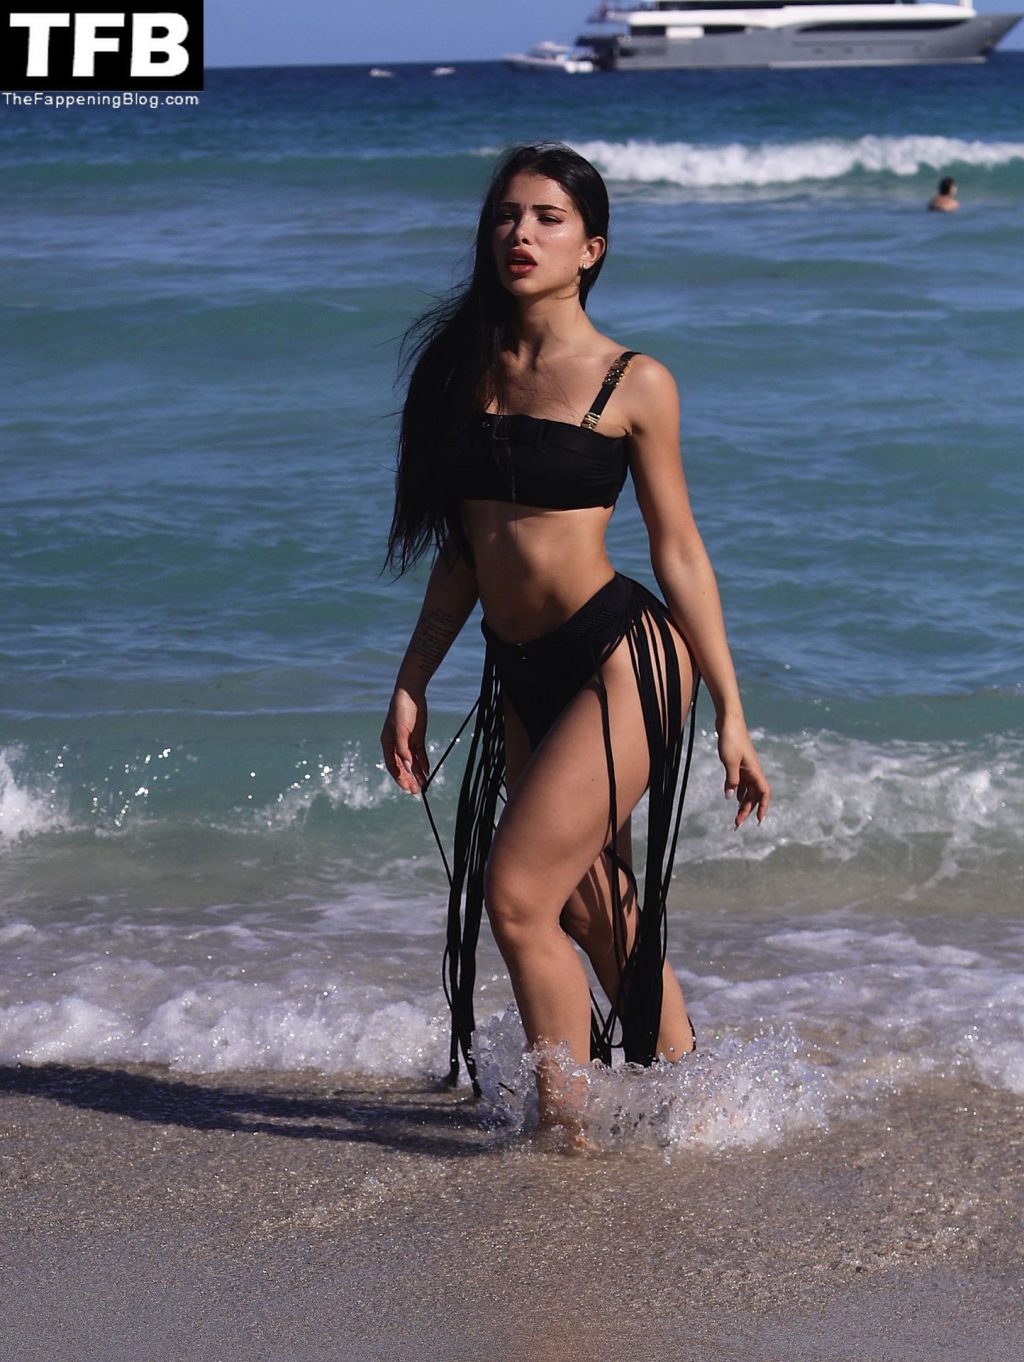 Paula Suarez Sexy The Fappening Blog 8 1024x1362 - Paula Suarez Shows Off Her Curves in the Beach in Miami (9 Photos)